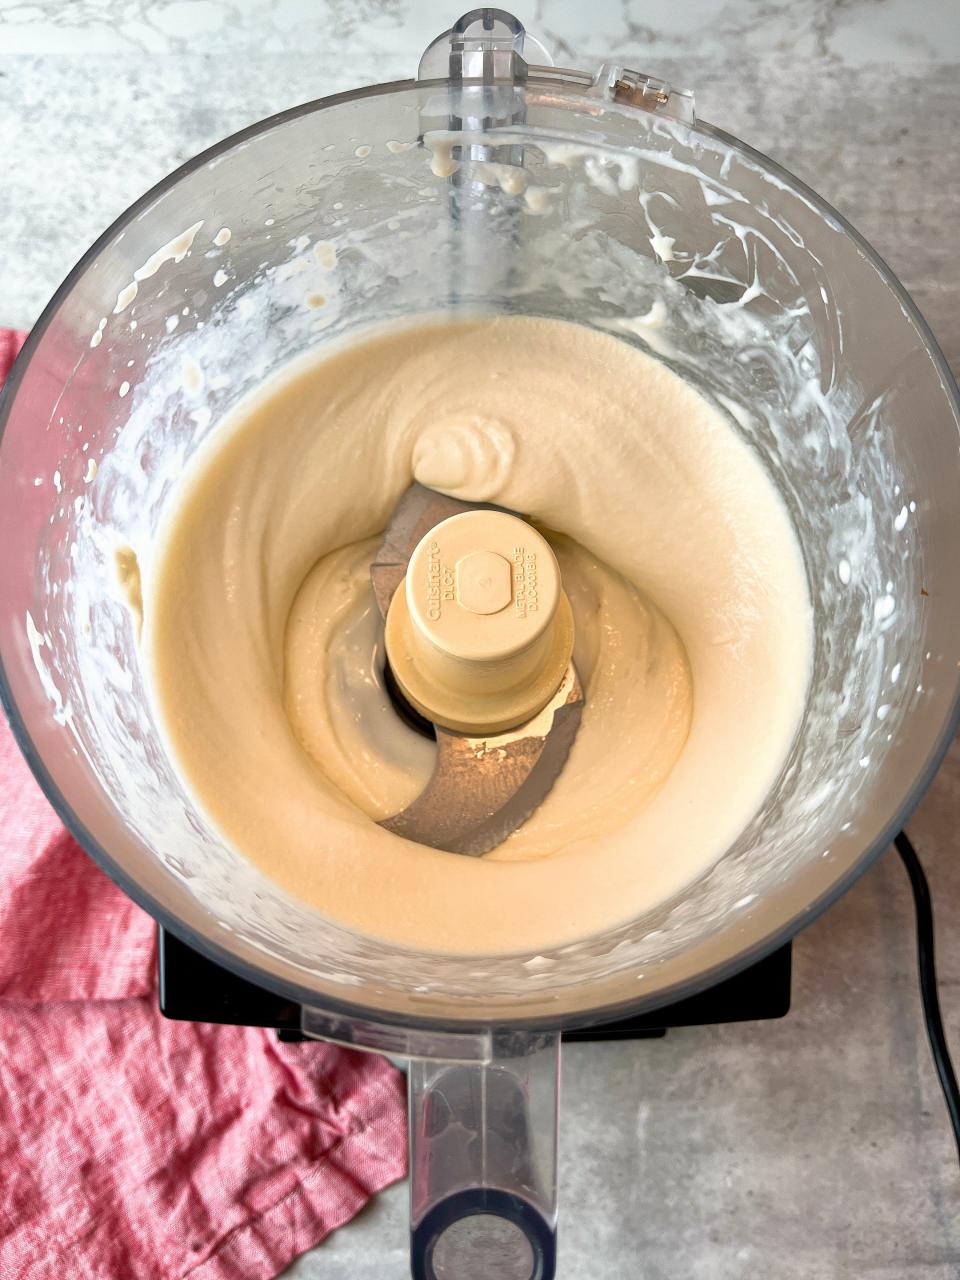 Make your own ice cream, no churning needed.